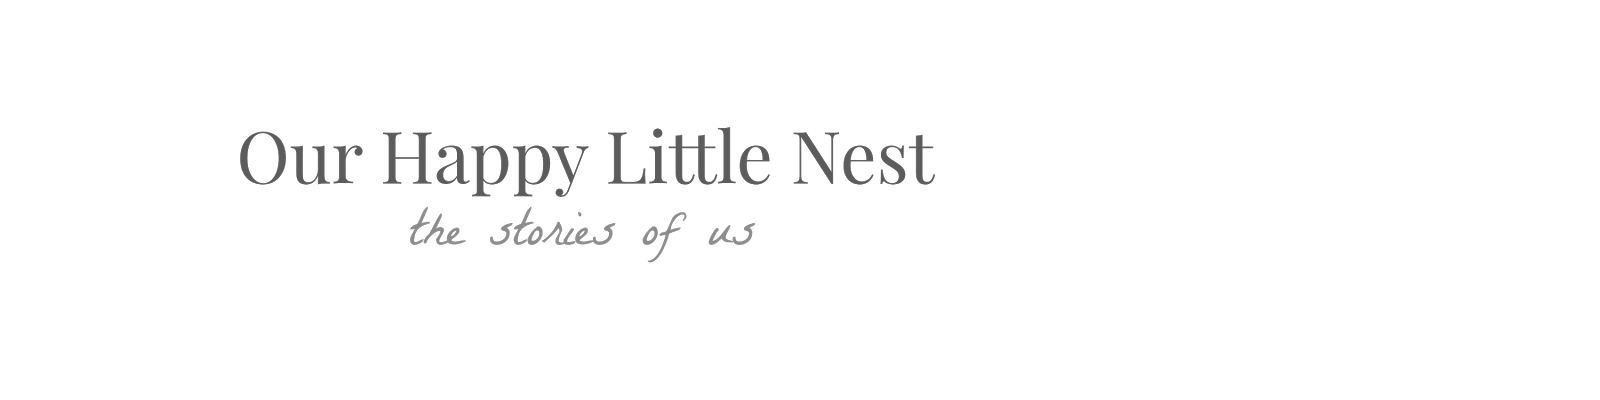 Our Happy Little Nest